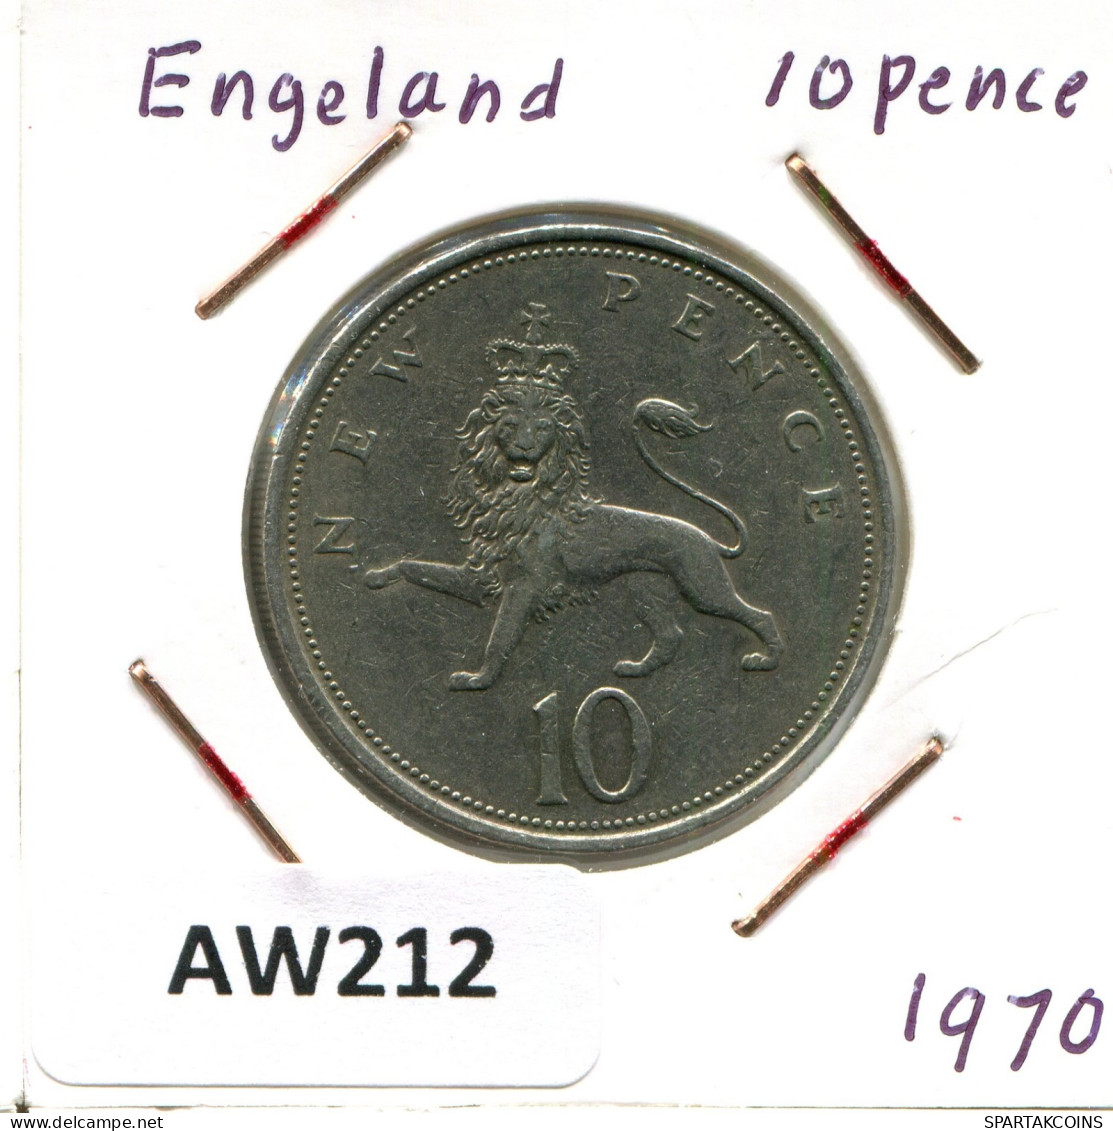 10 PENCE 1970 UK GREAT BRITAIN Coin #AW212.U.A - 10 Pence & 10 New Pence